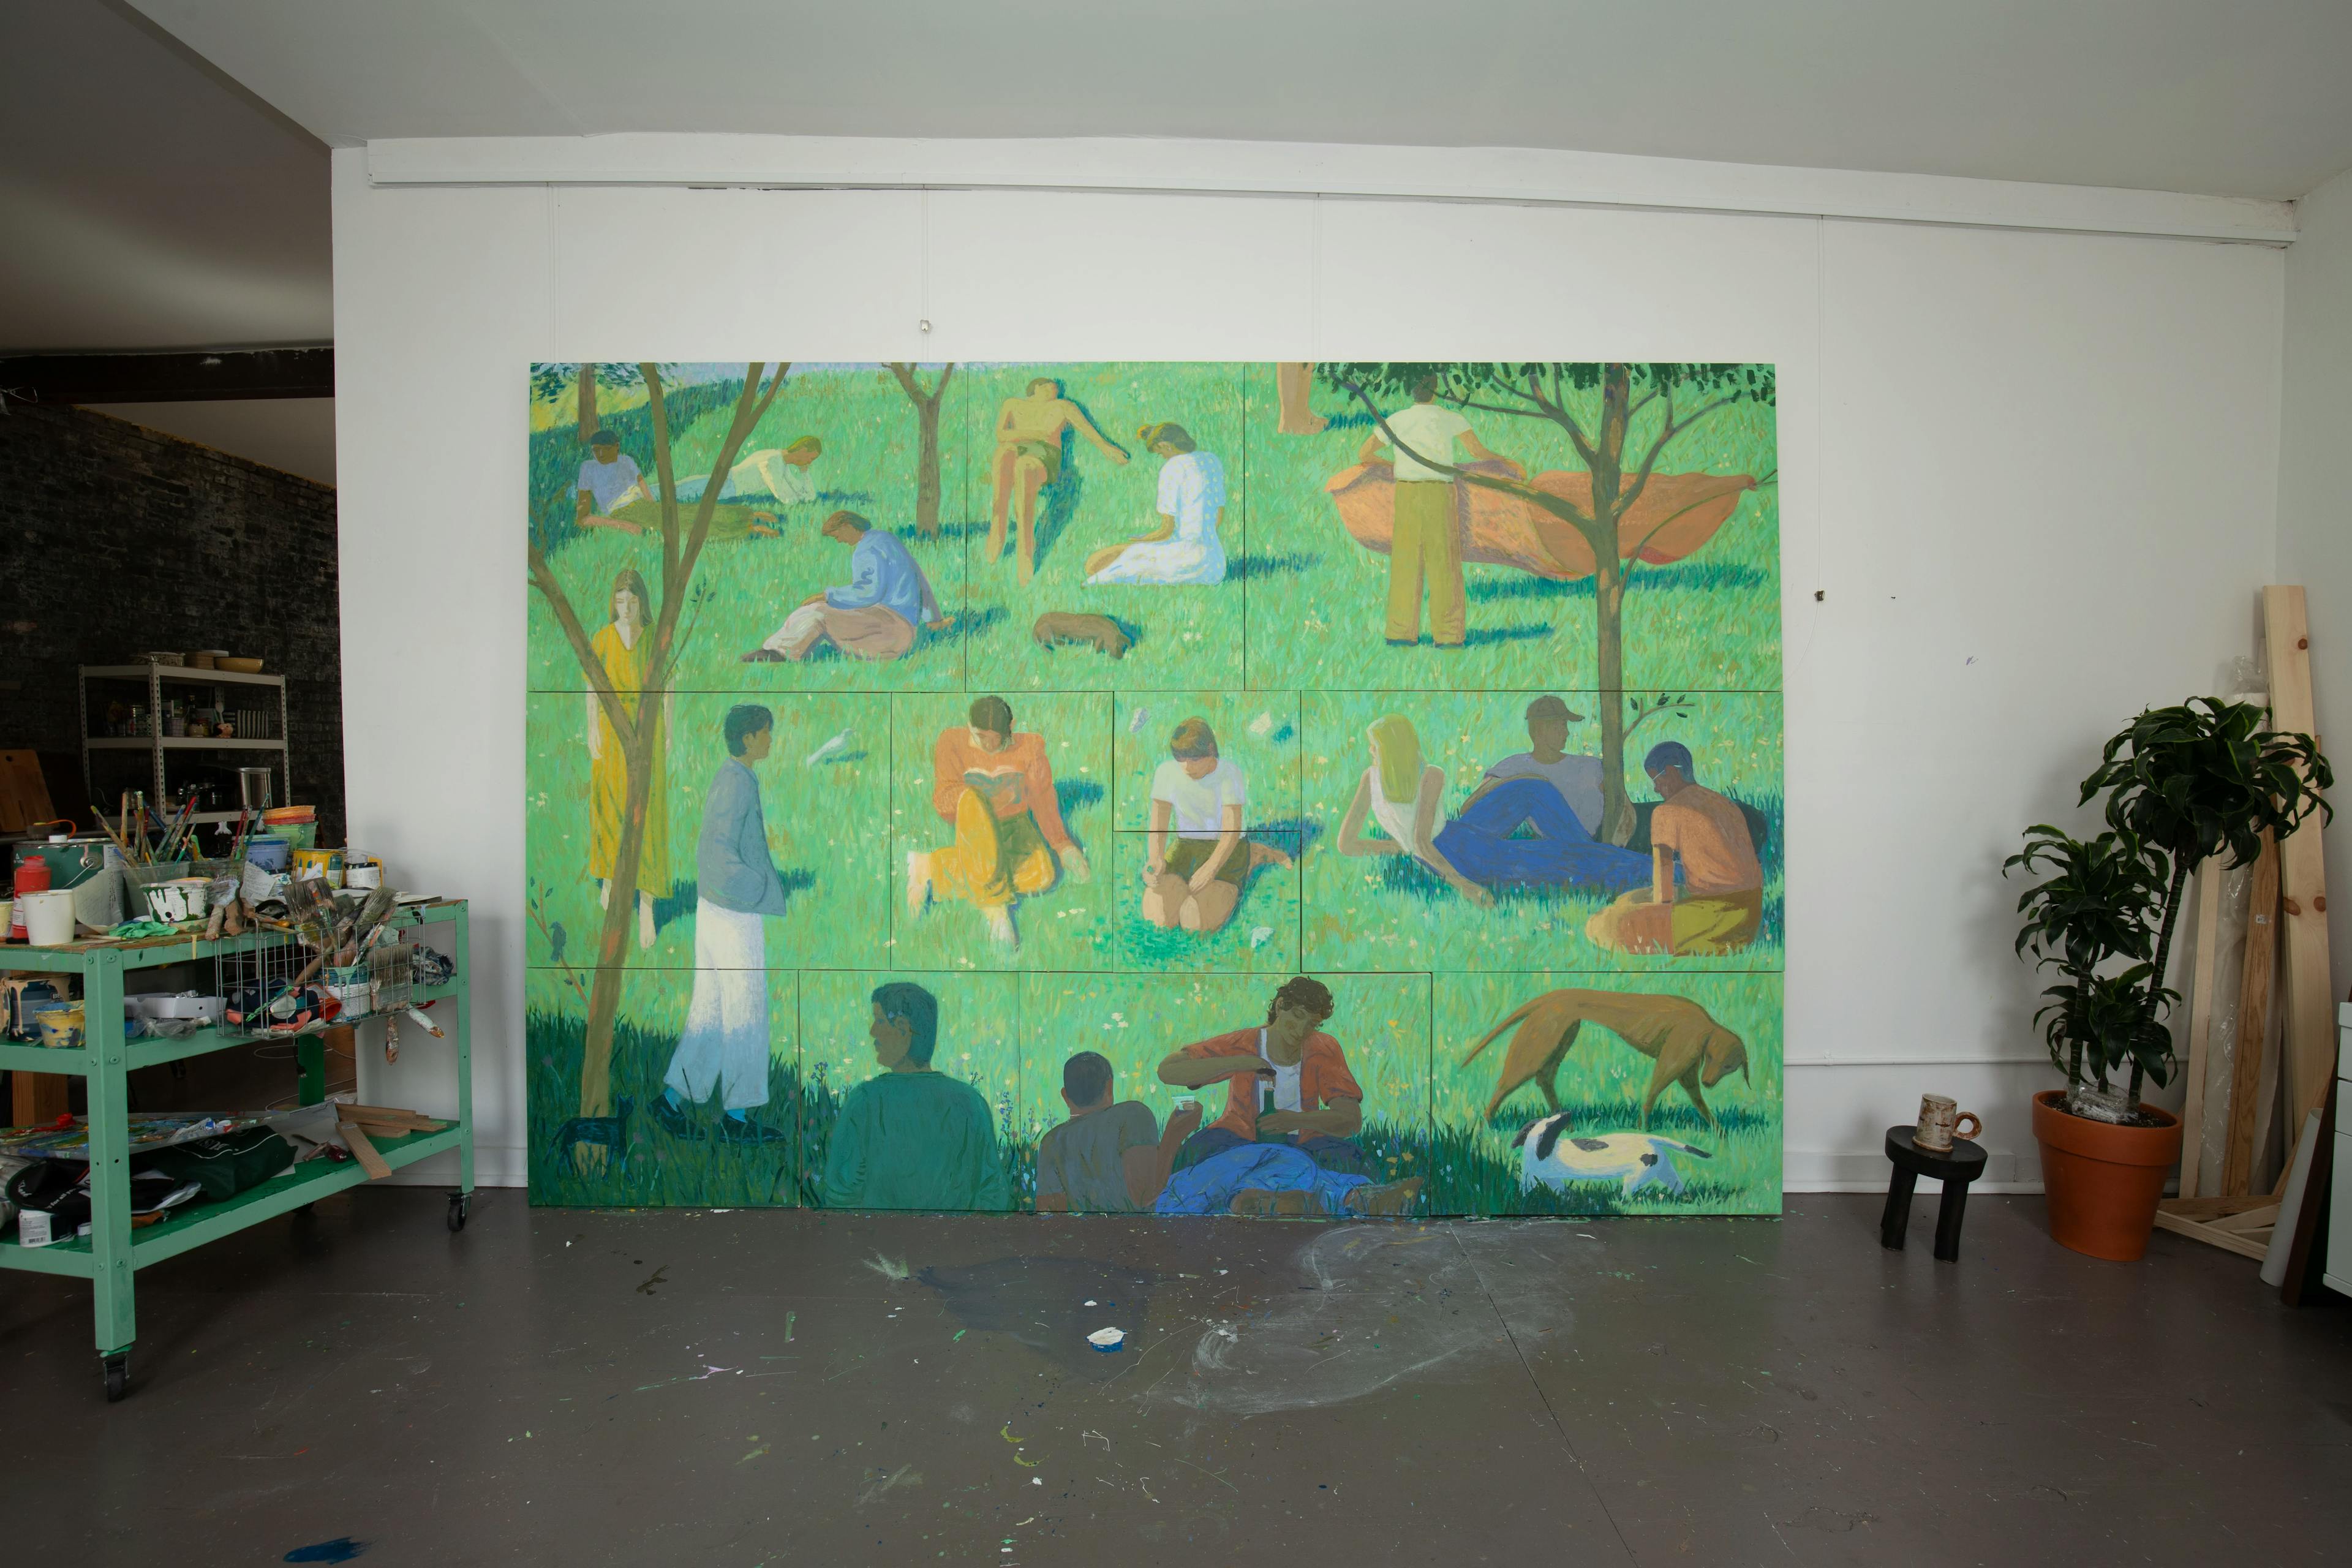 A large-scale installation comprised of individual, figurative paintings by artist Jackson Joyce, displayed against a white wall in his Brooklyn studio.